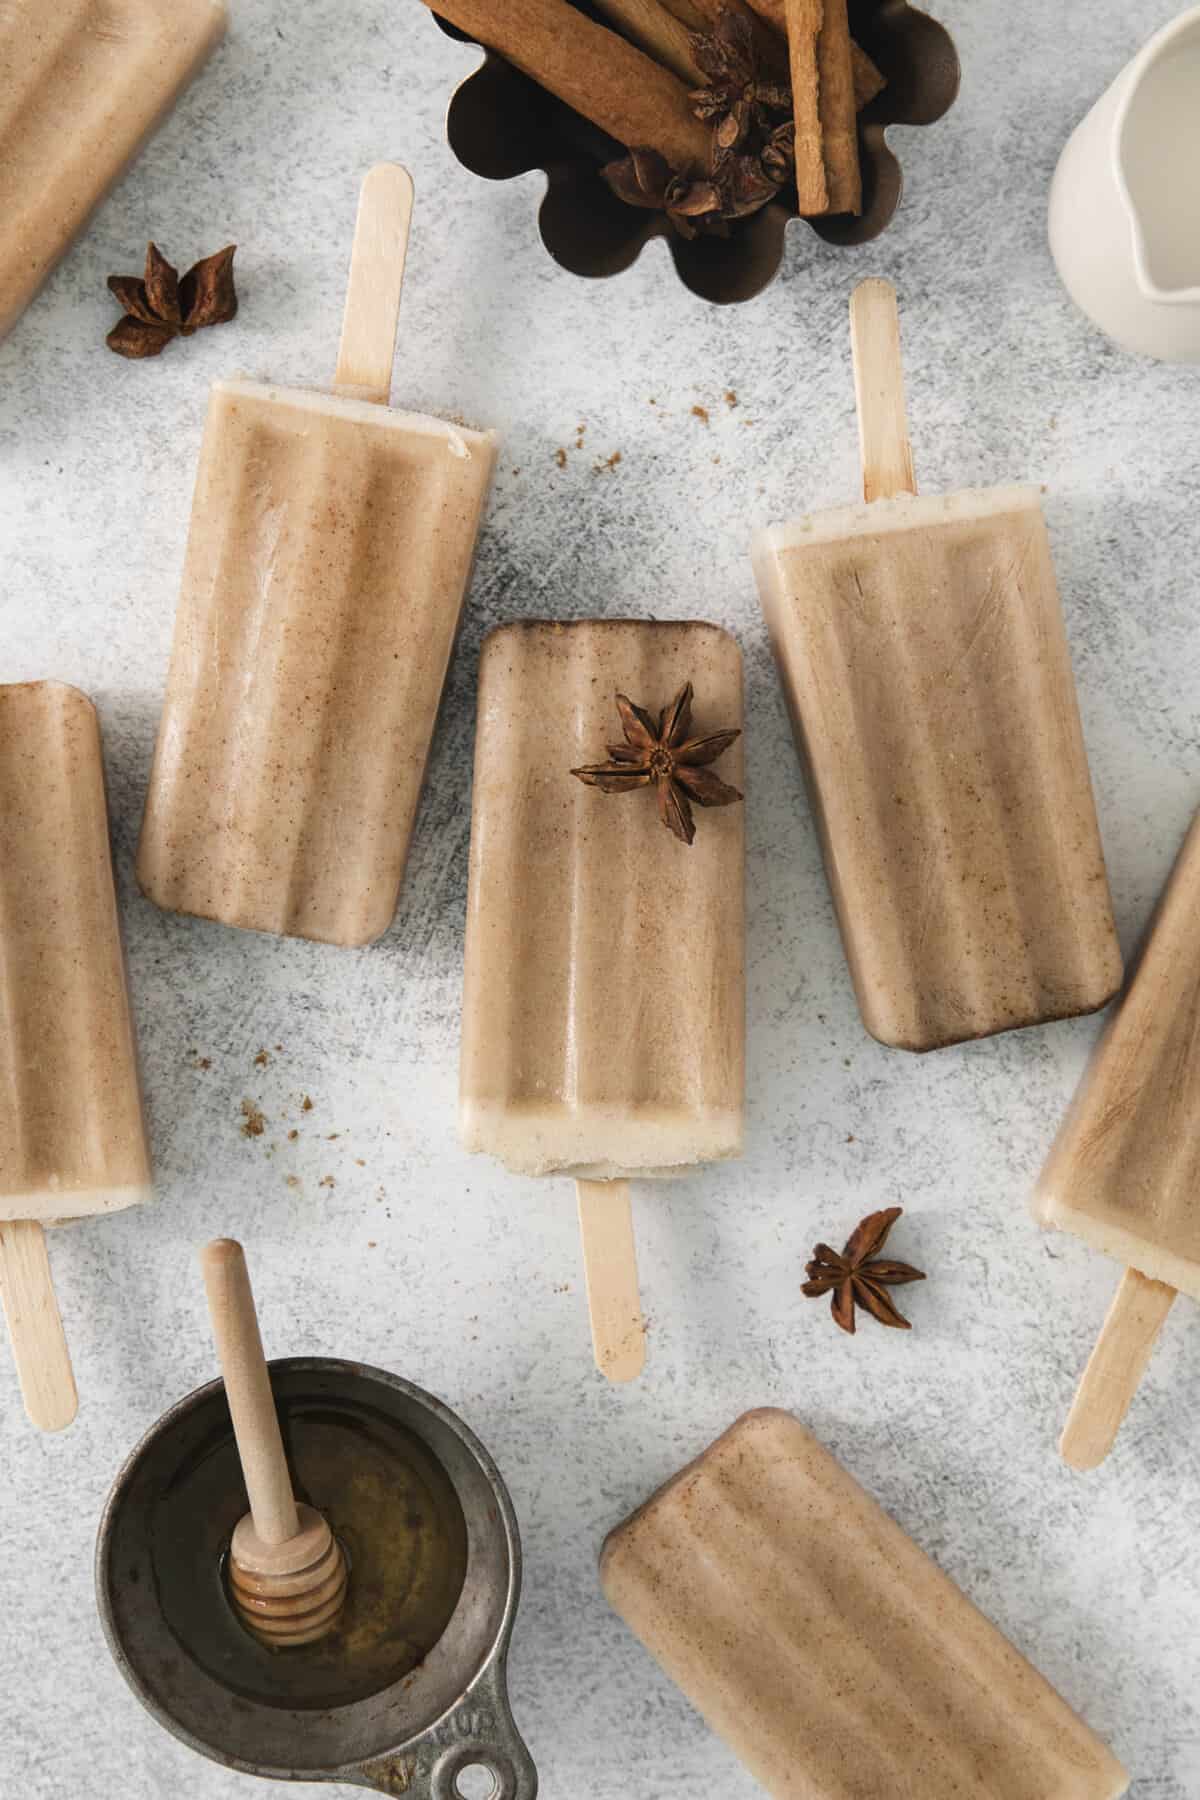 5 chai popsicles lined up on a counter.